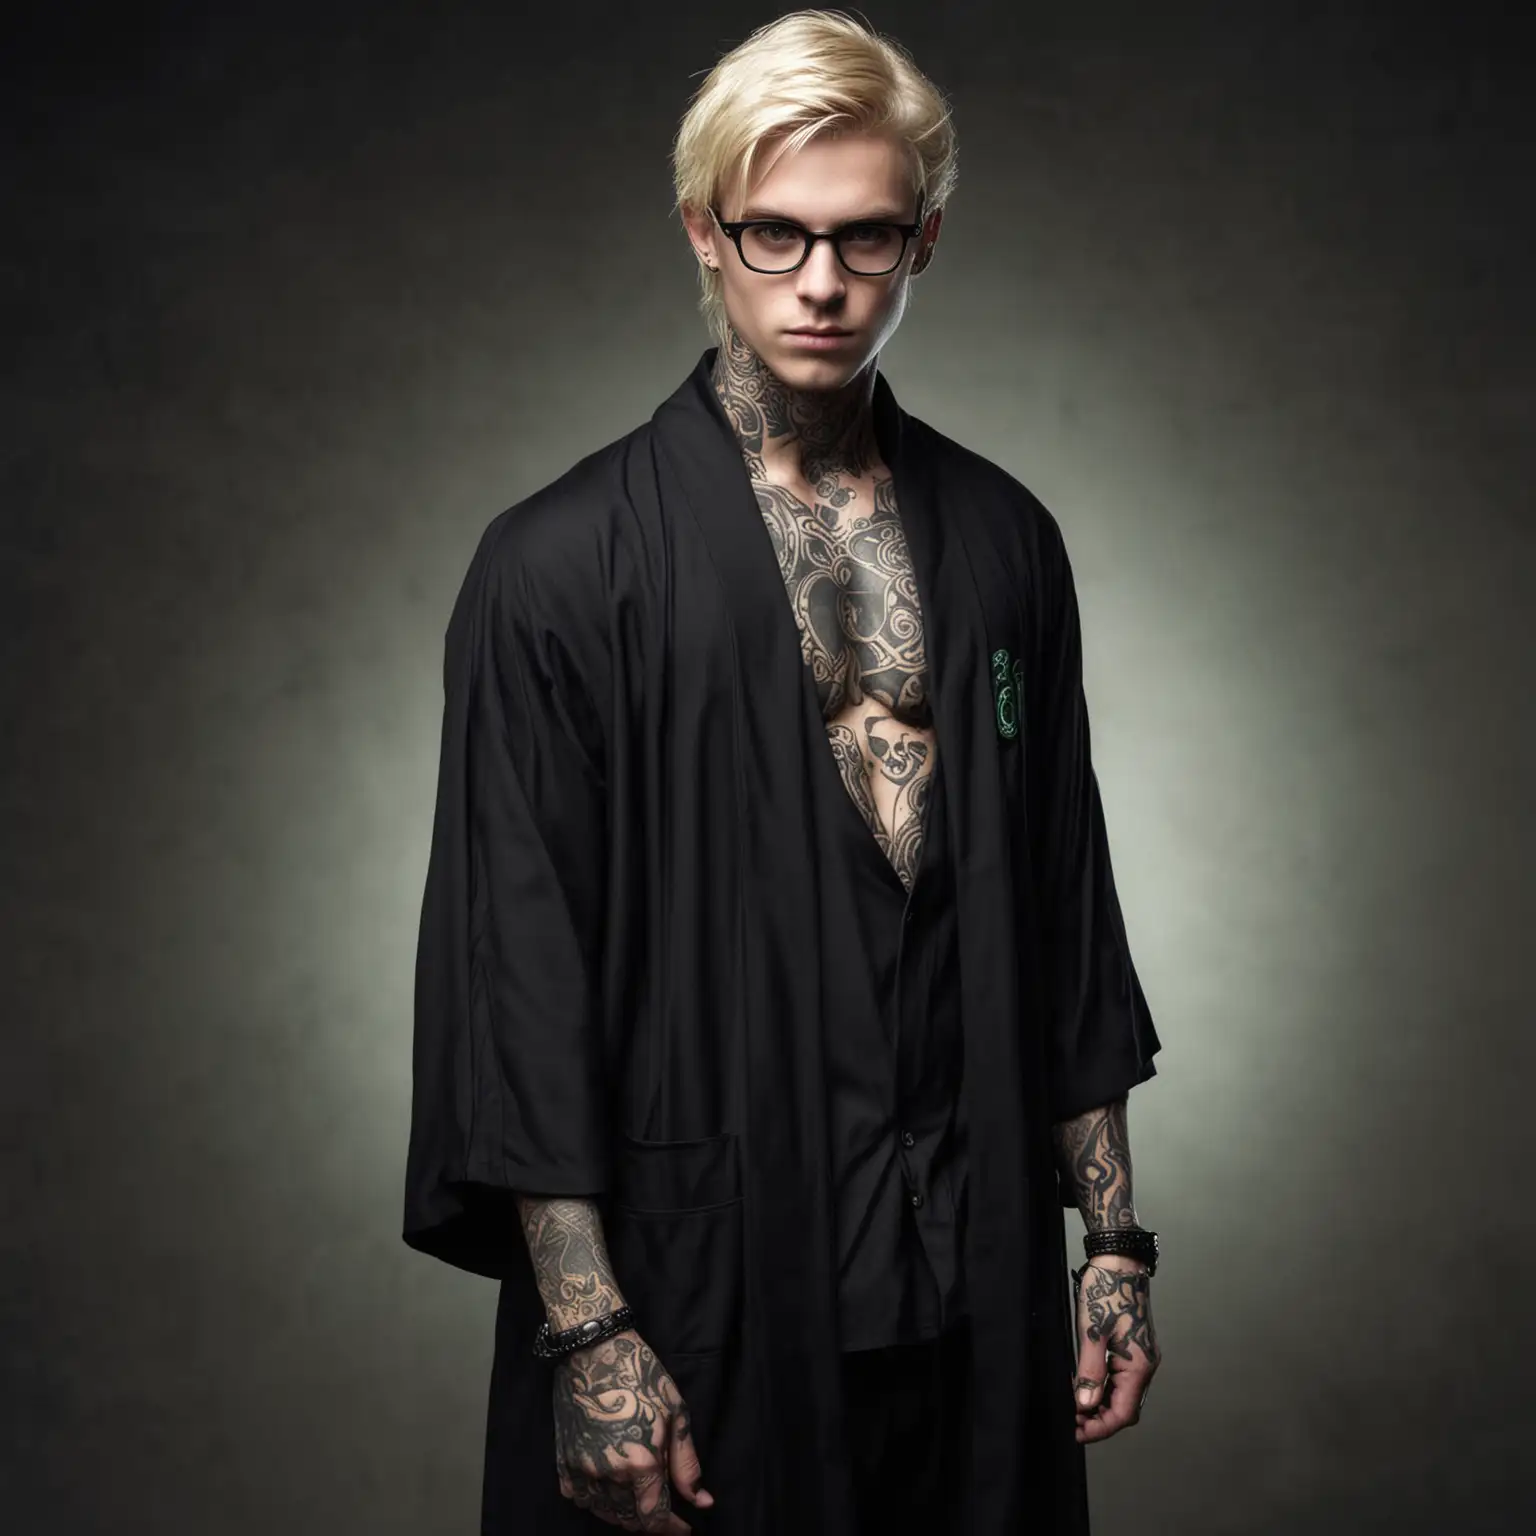 Sinister Slytherin Teen Boy with Magical Tattoos and Piercings